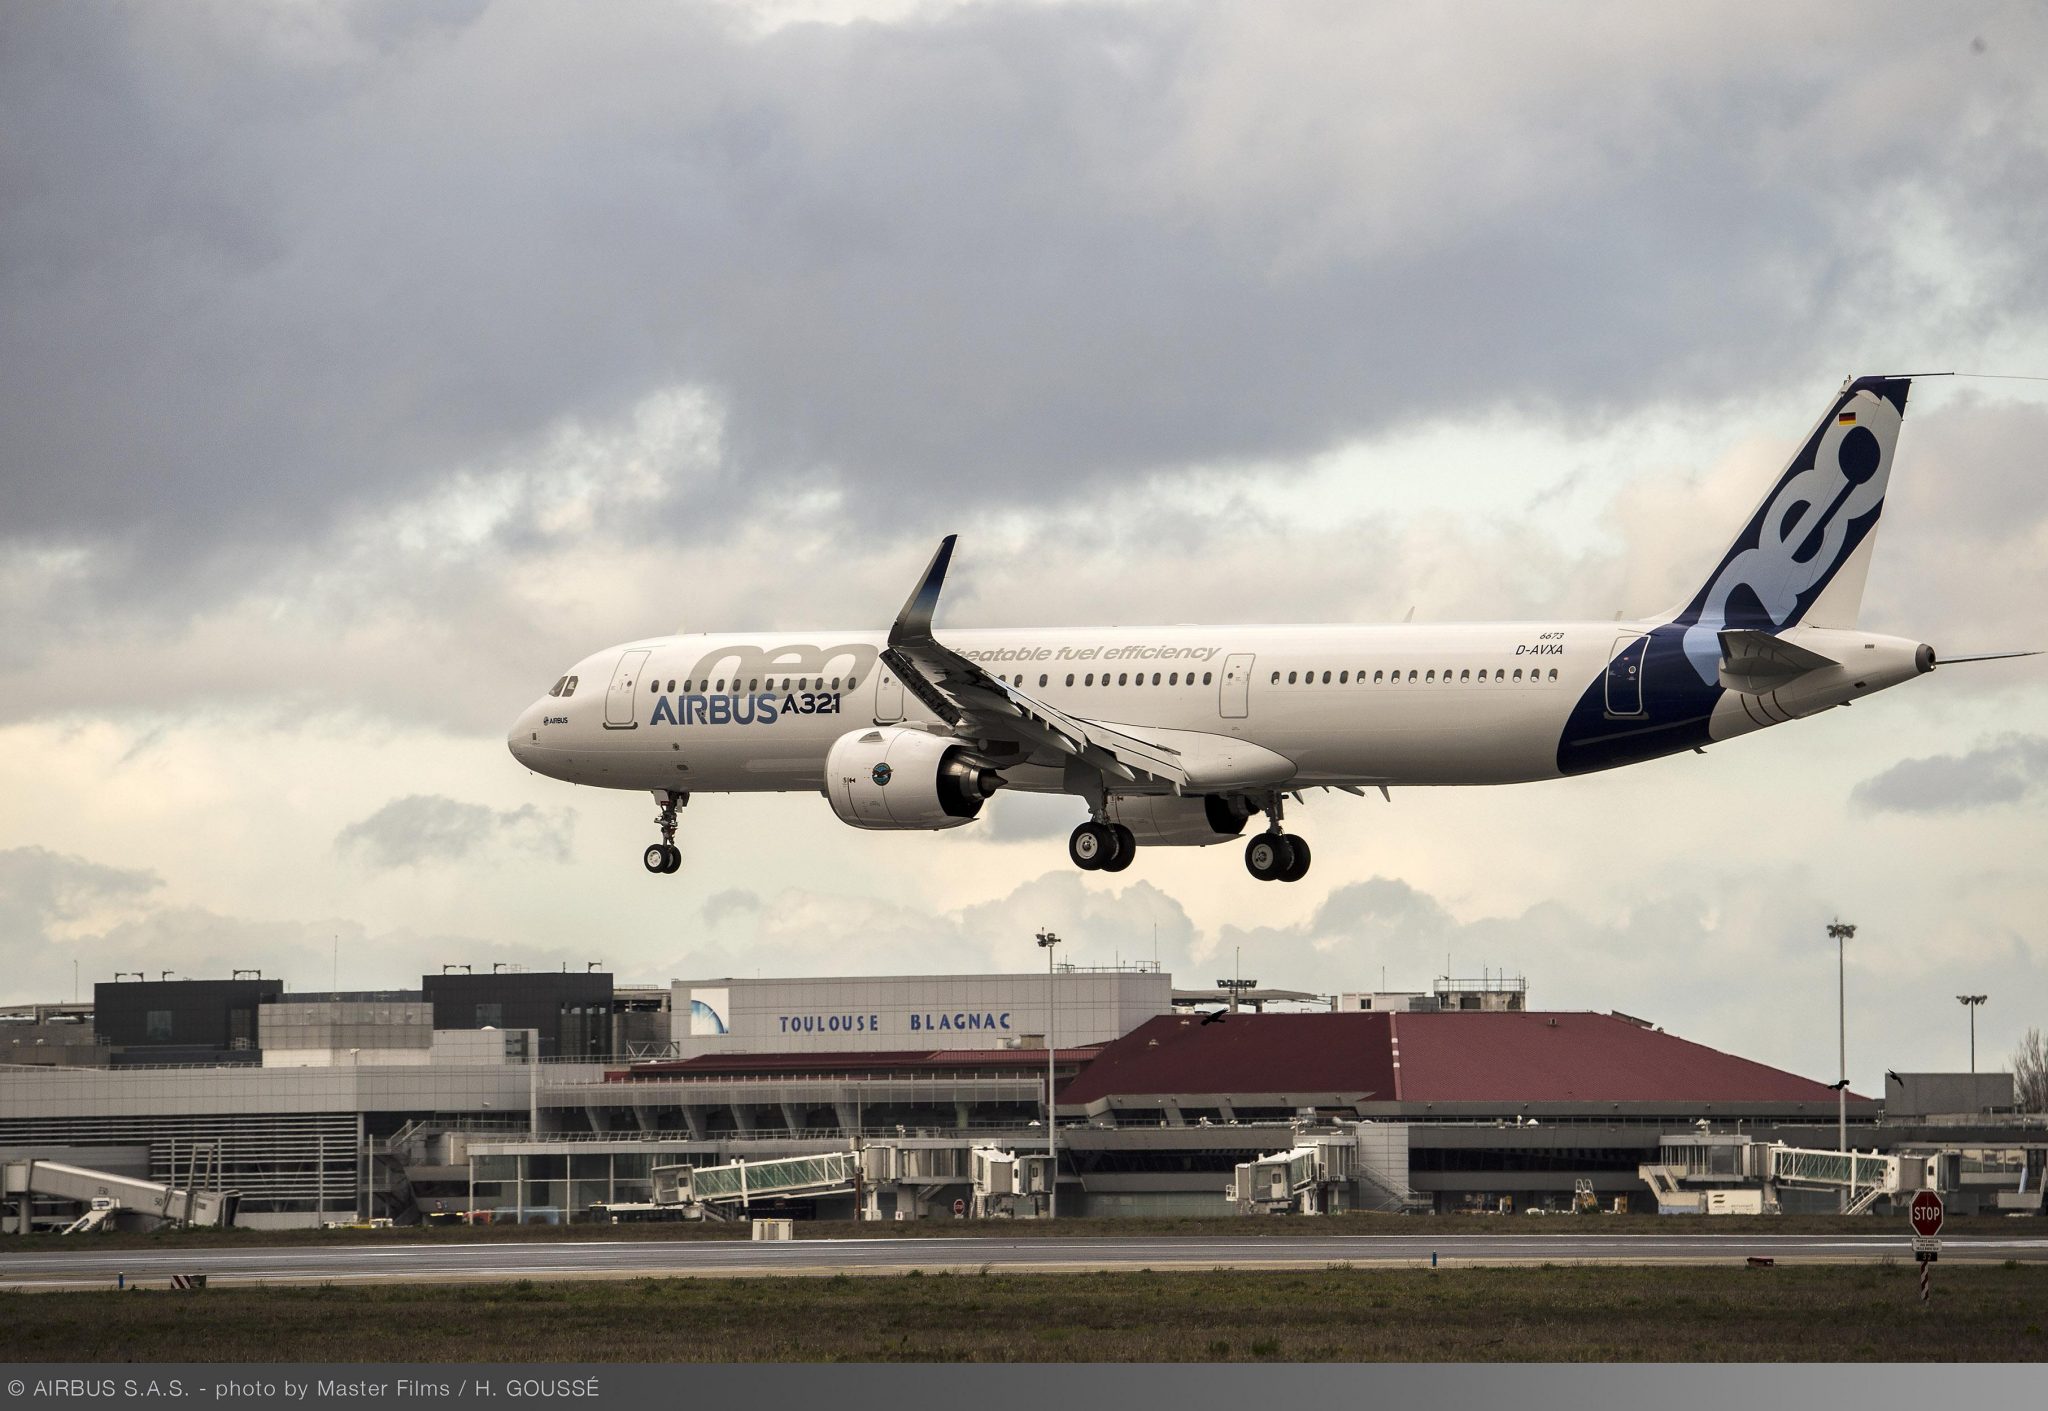 Airbus is hiring for its future projects